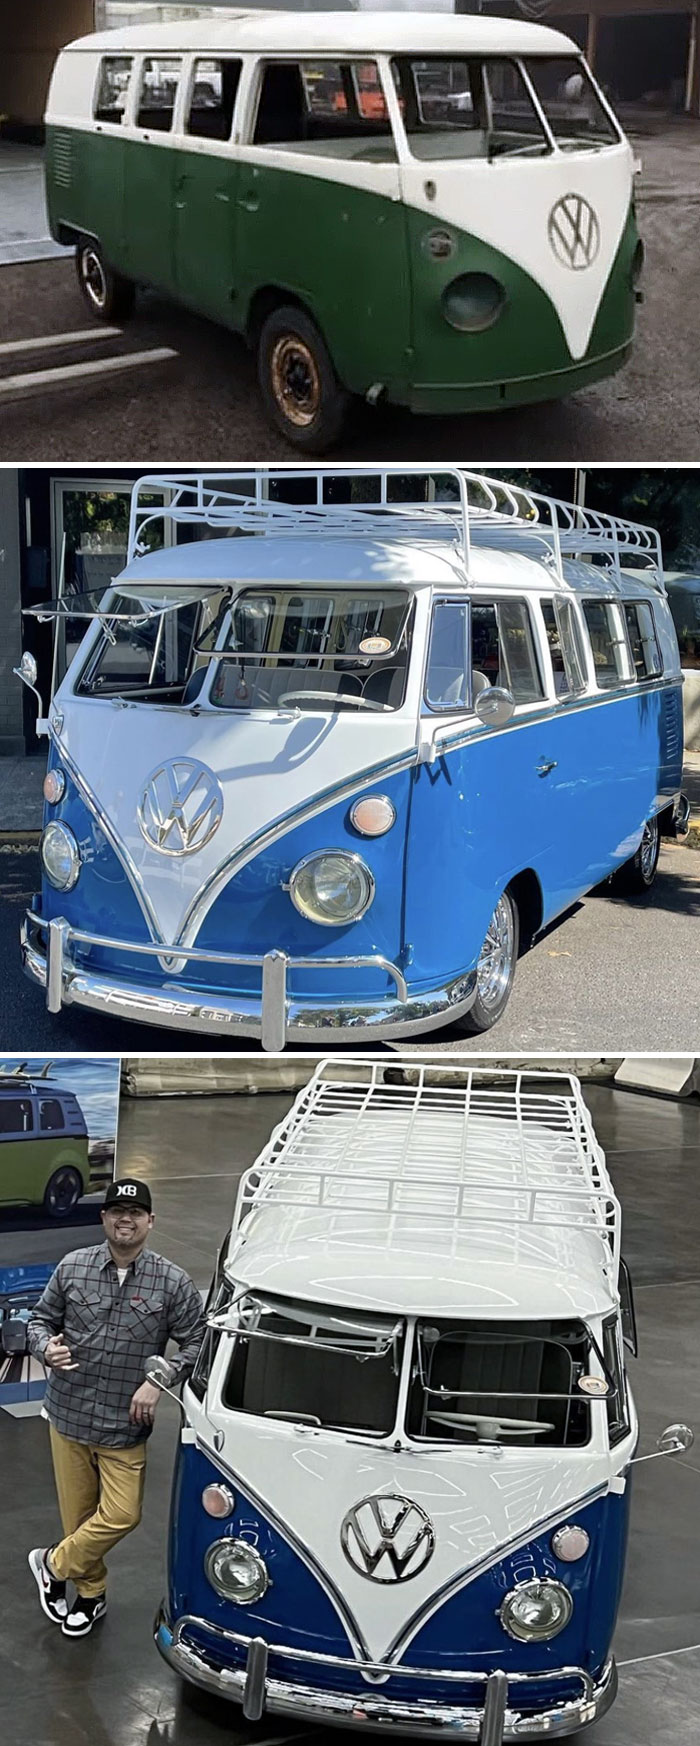 Here’s My Father And His Before And After Pics Of His ‘65 Bus Restoration Project. He’s Very Proud Of It And He Spent 4x Of My College Degree To Make It What It Is Today